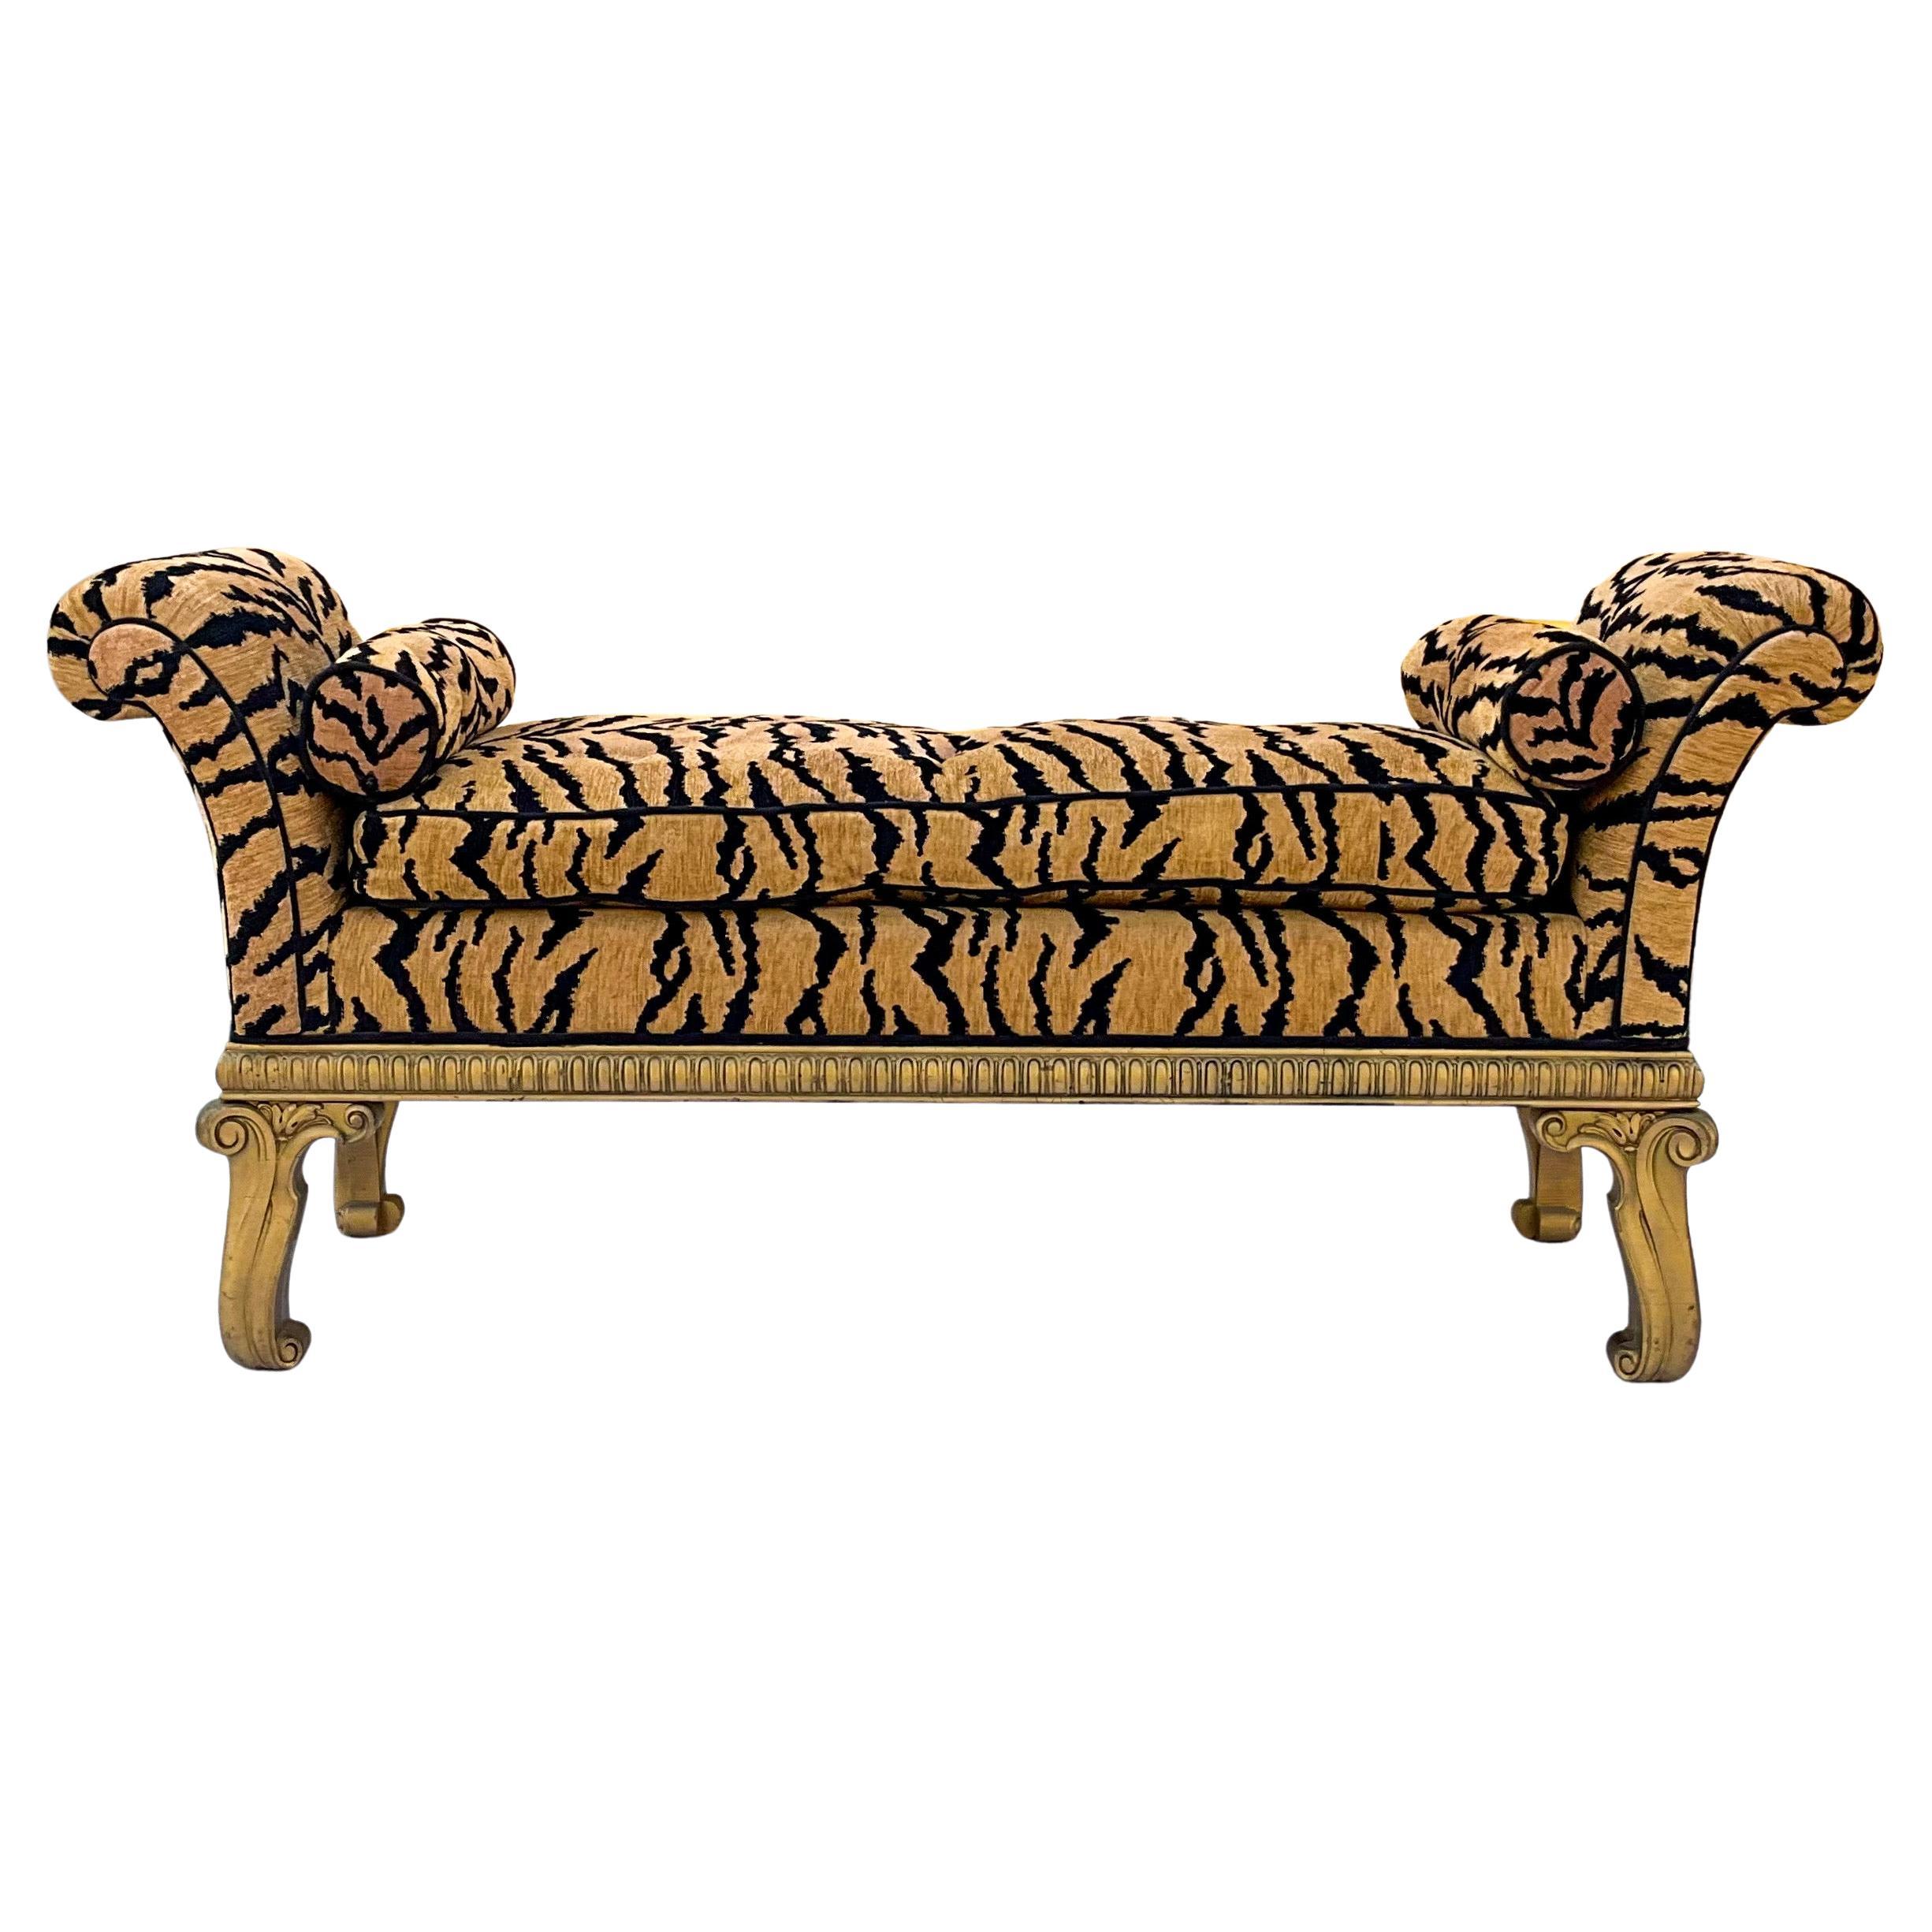 20th Century French Style Carved Giltwood Bench with Tiger Upholstery